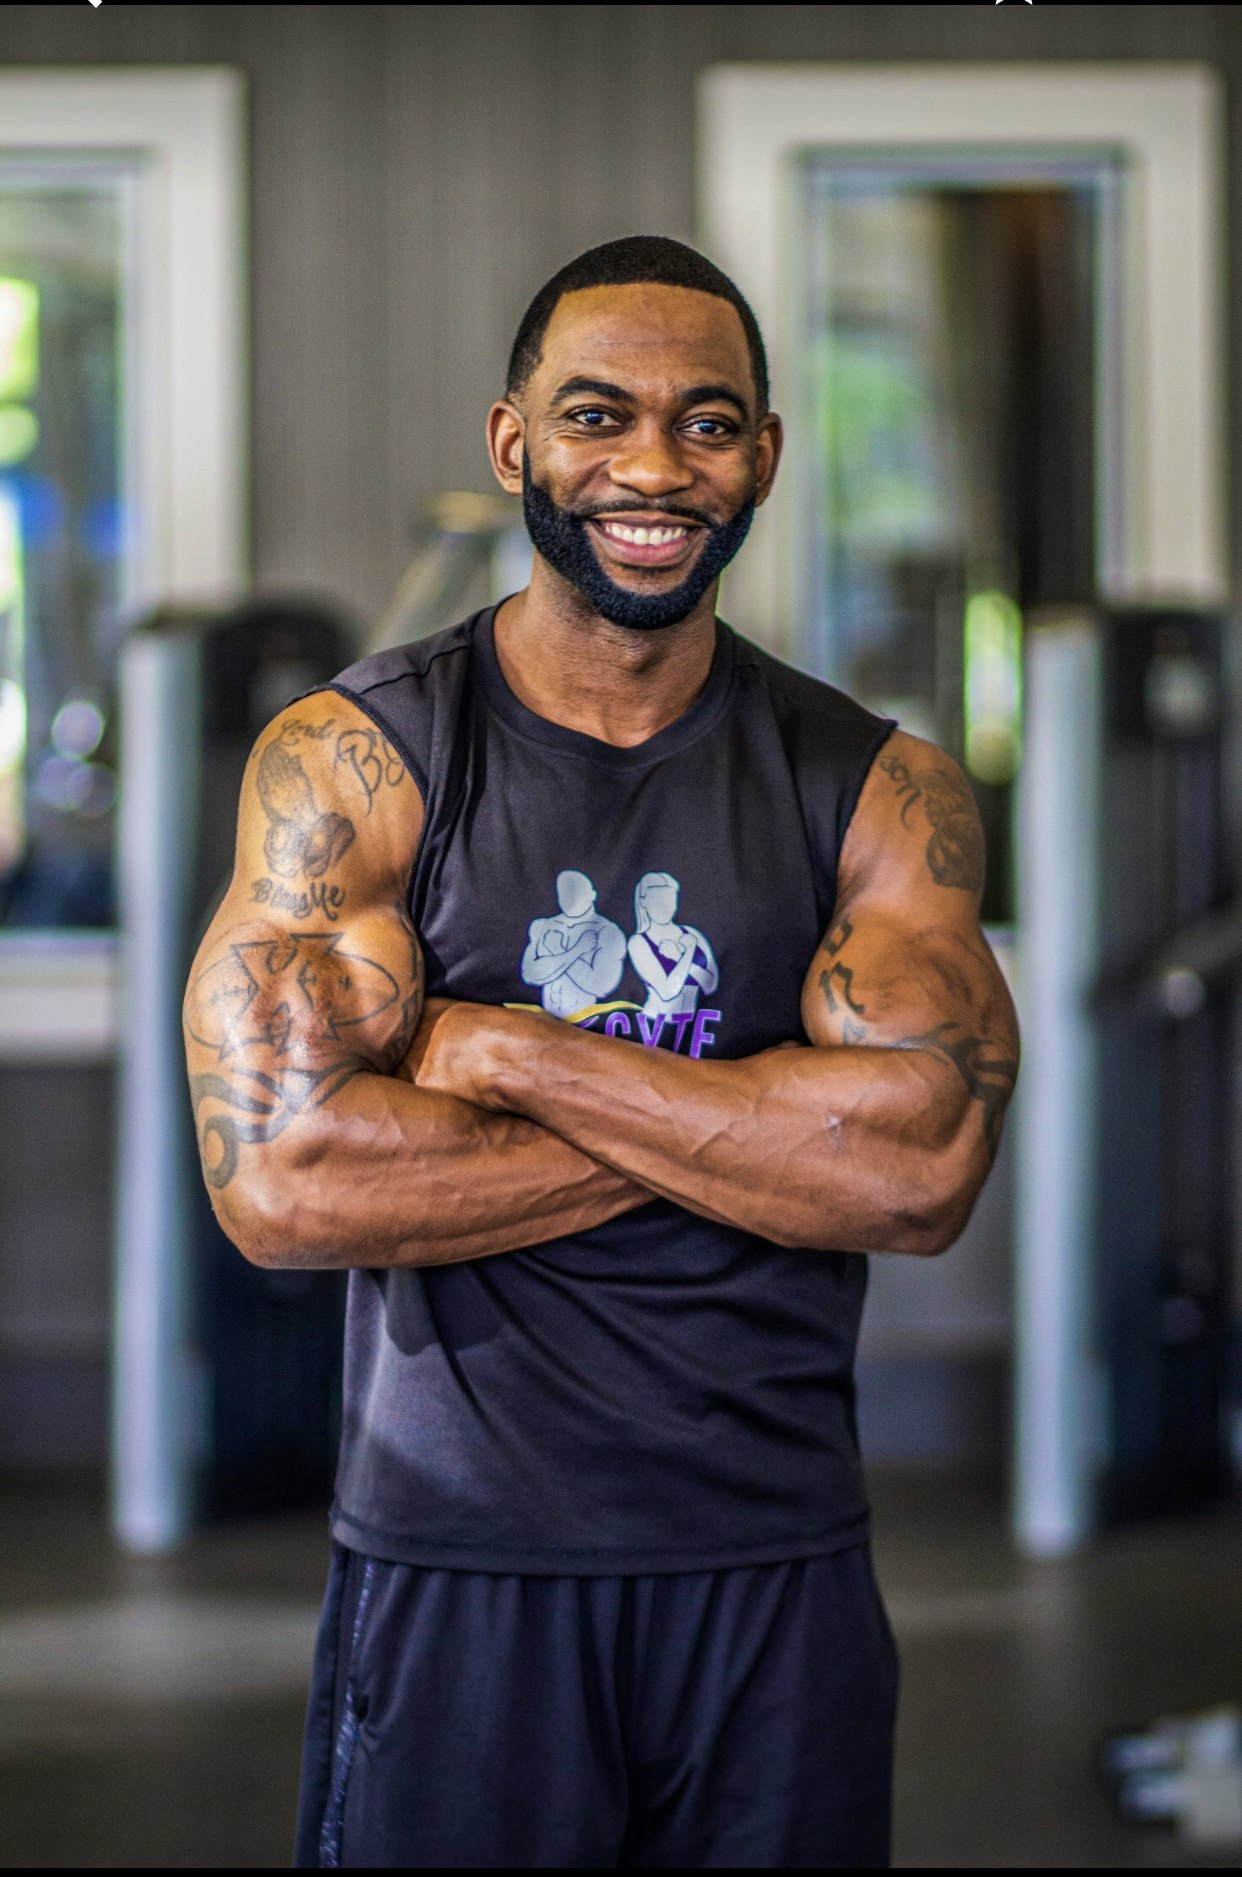 Top 10 Miami, FL Personal Trainers w/ Prices & Reviews